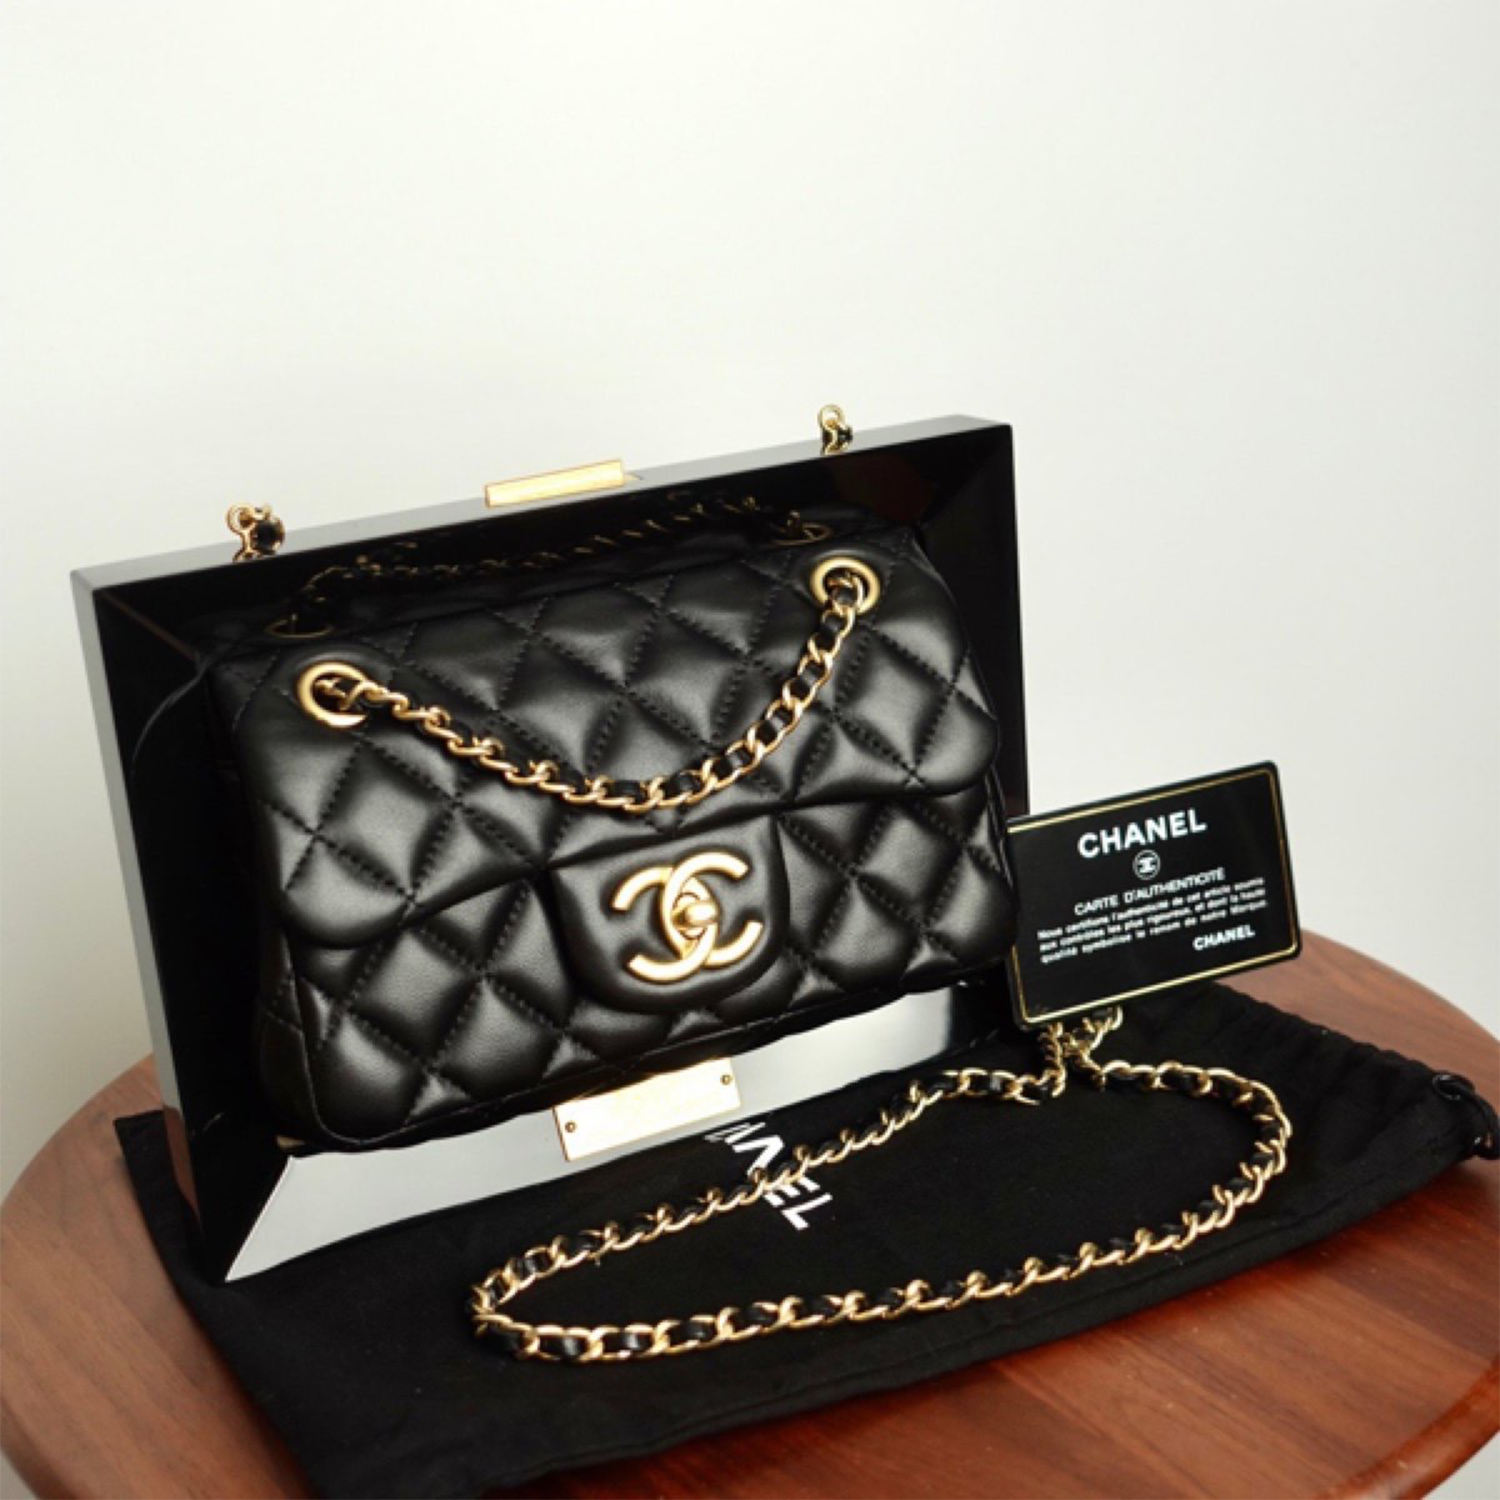 A LIMITED EDITION BLACK LUCITE & LAMBSKIN LEATHER FRAME BAG, CHANEL, 2014